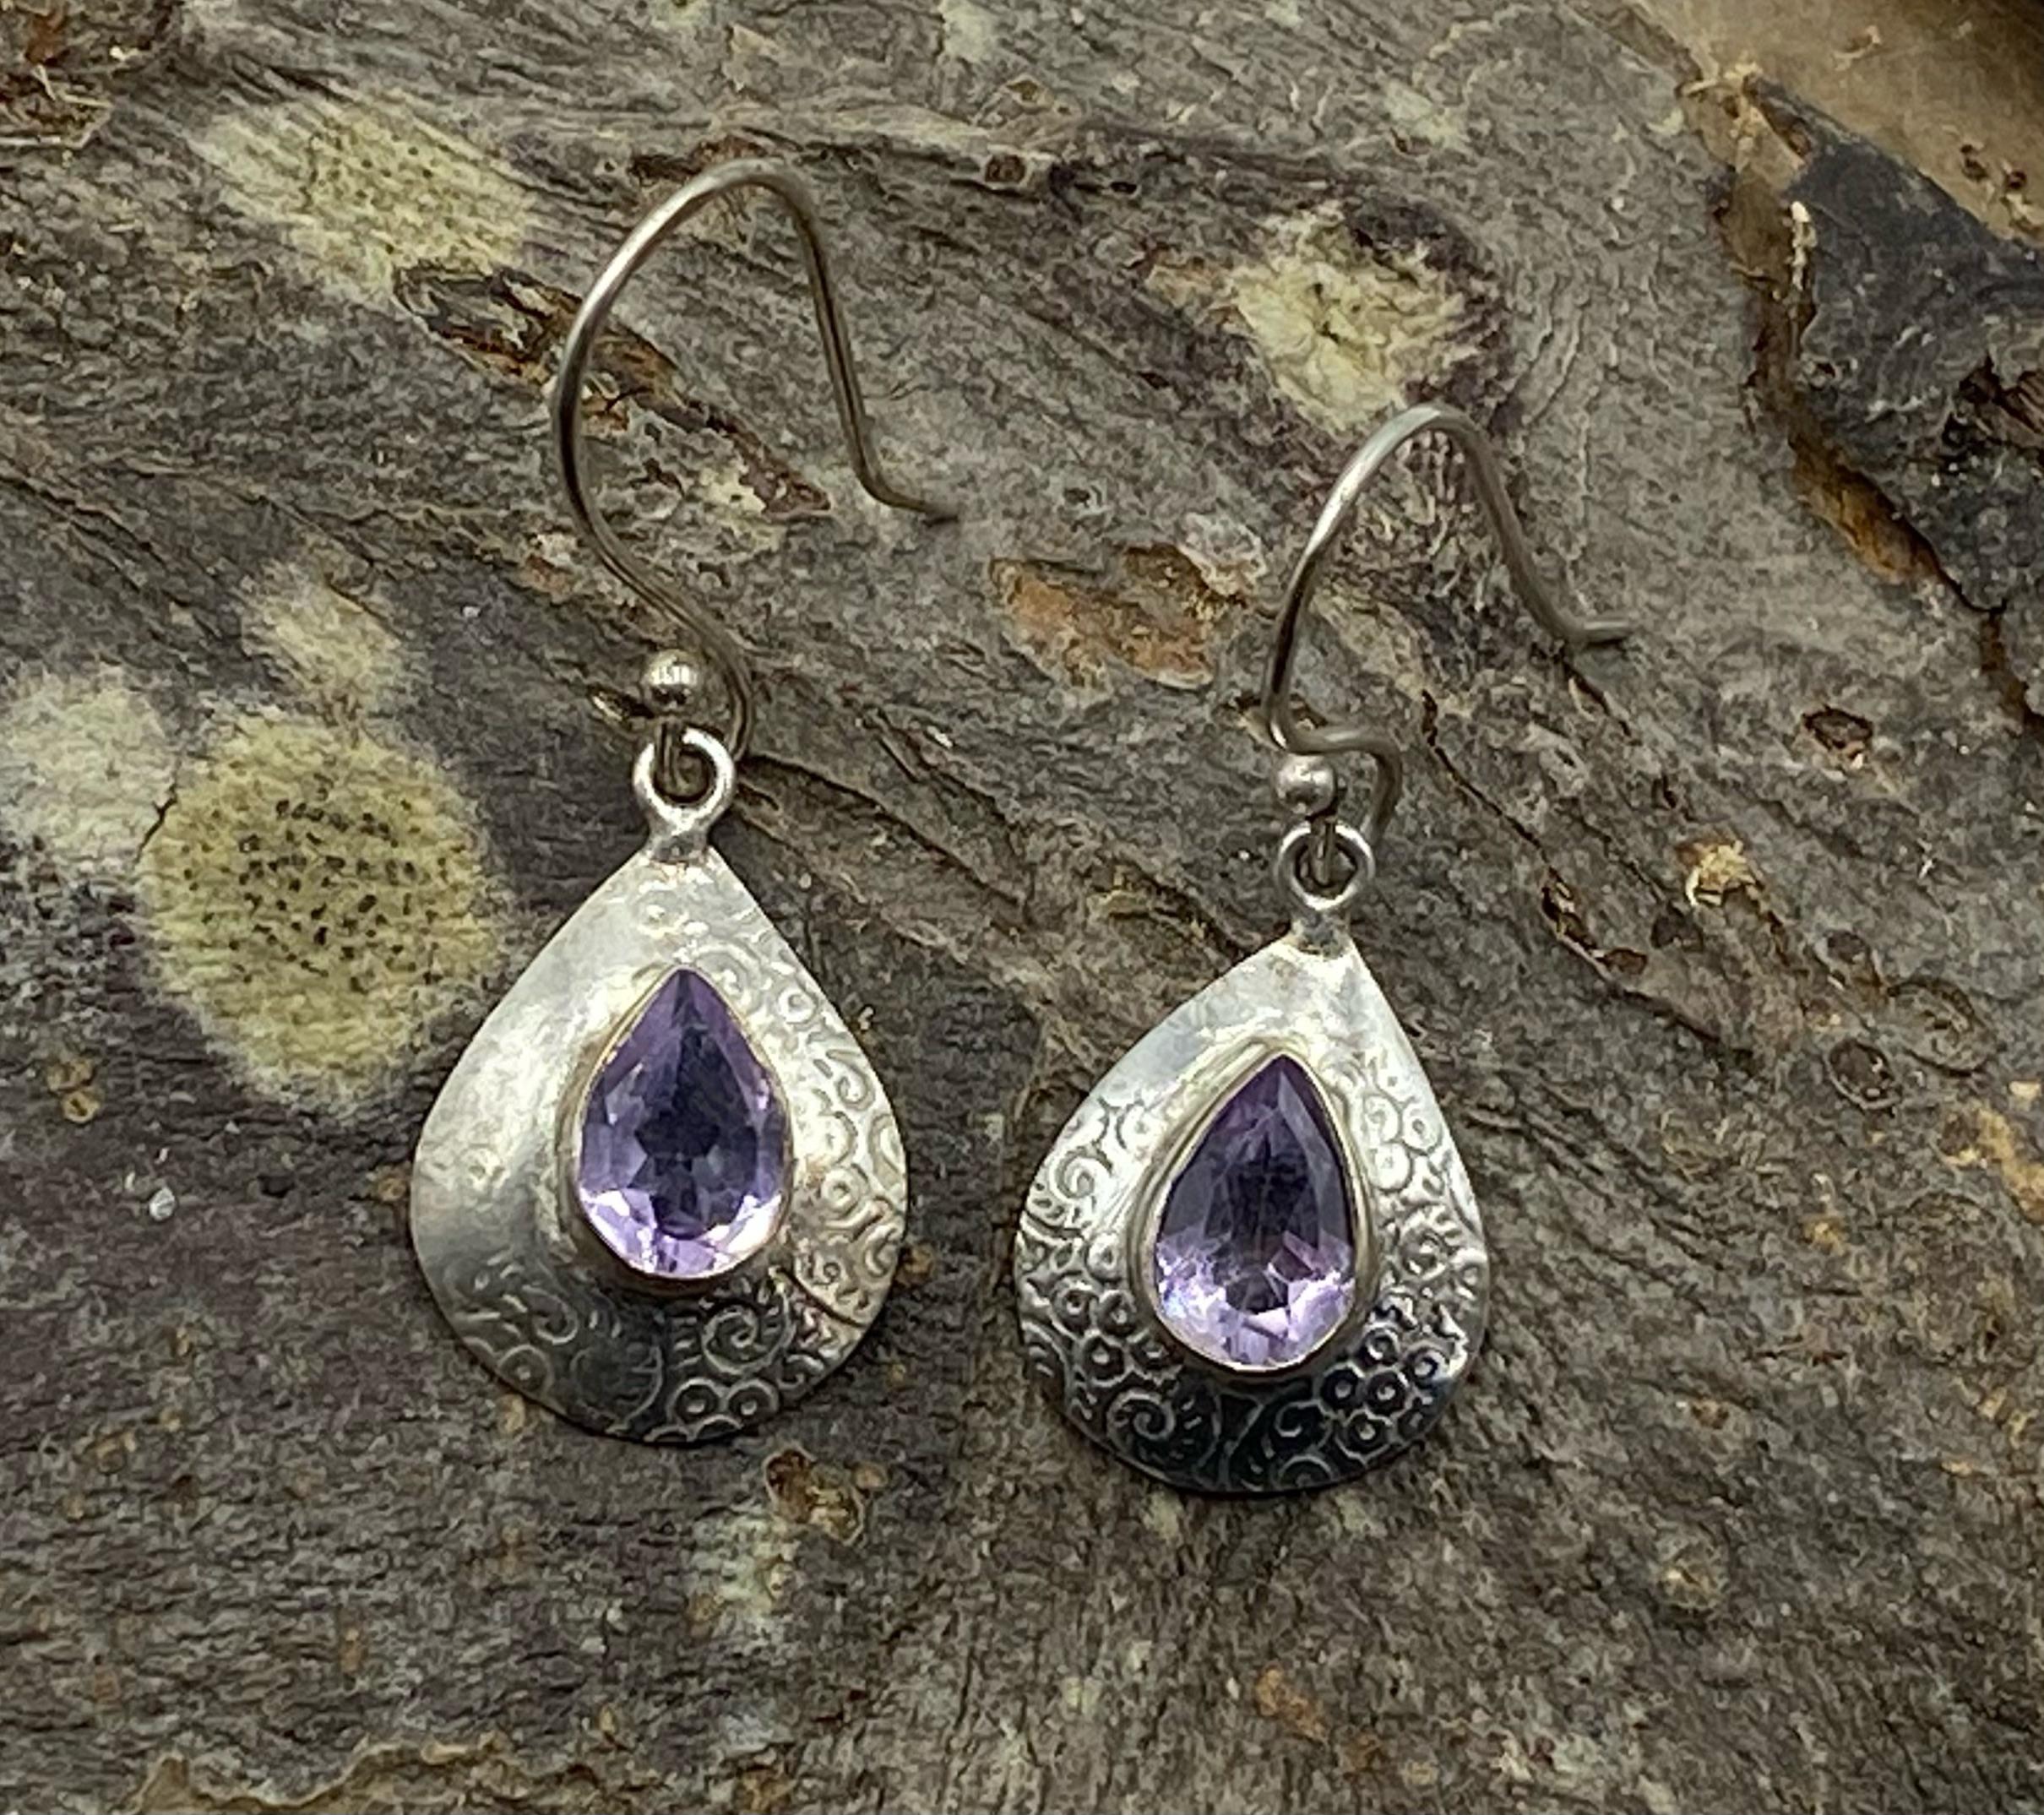 Silver Pear Drop Earrings with Faceted Amethyst Cabochons.